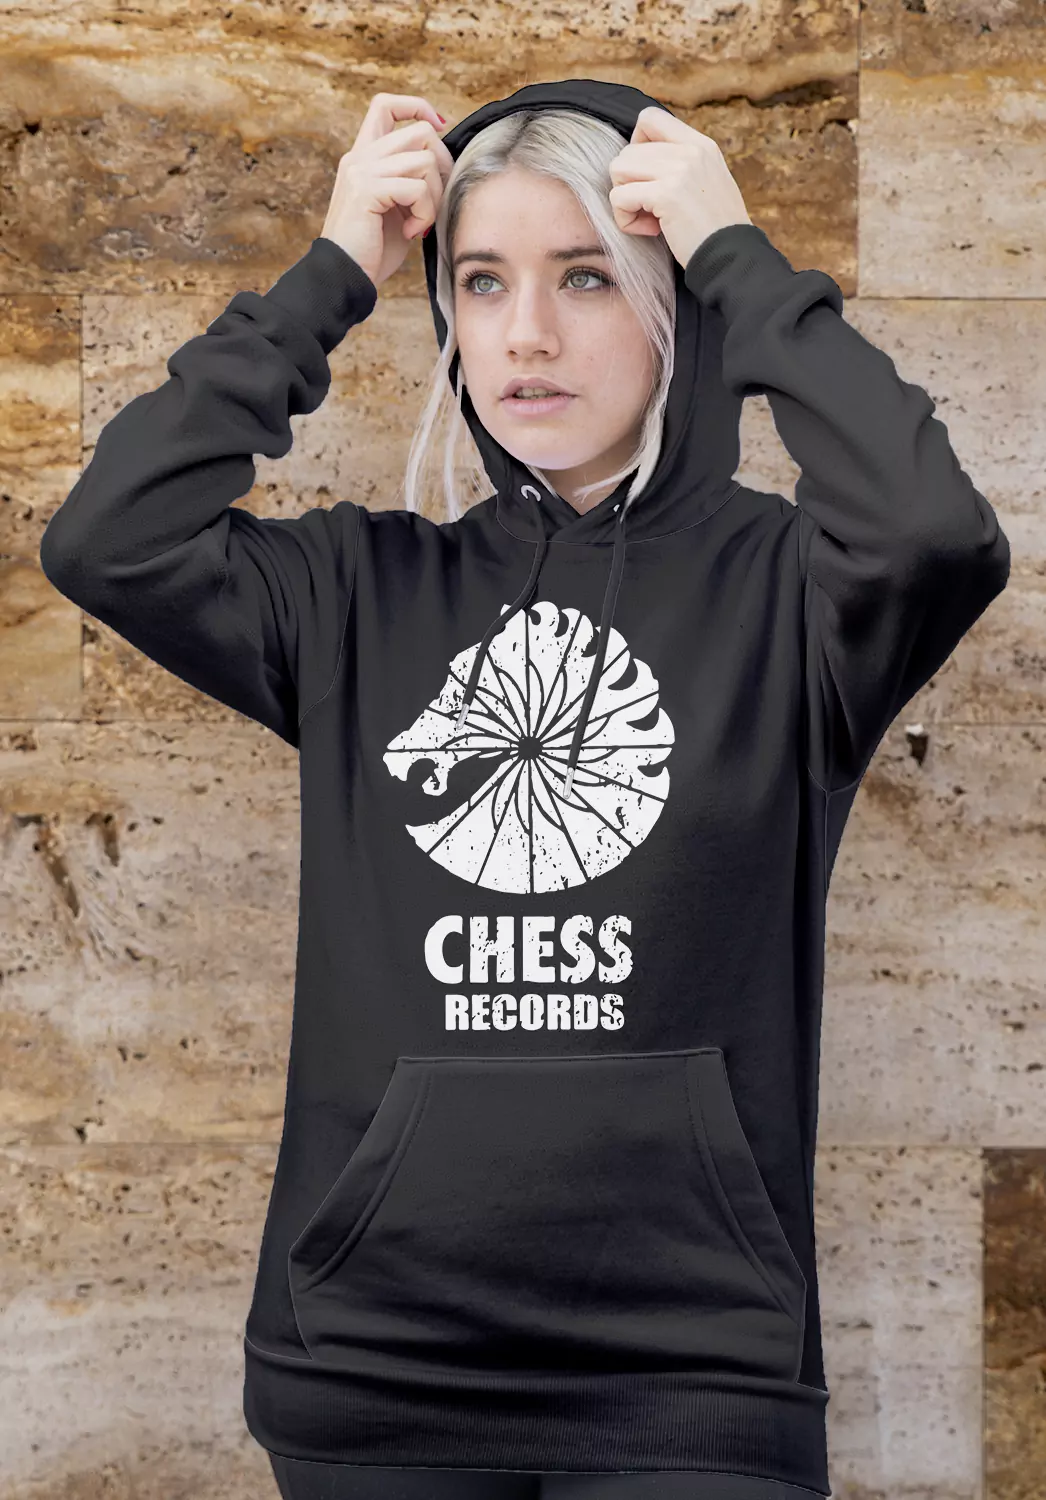 chess records hoodie for girls